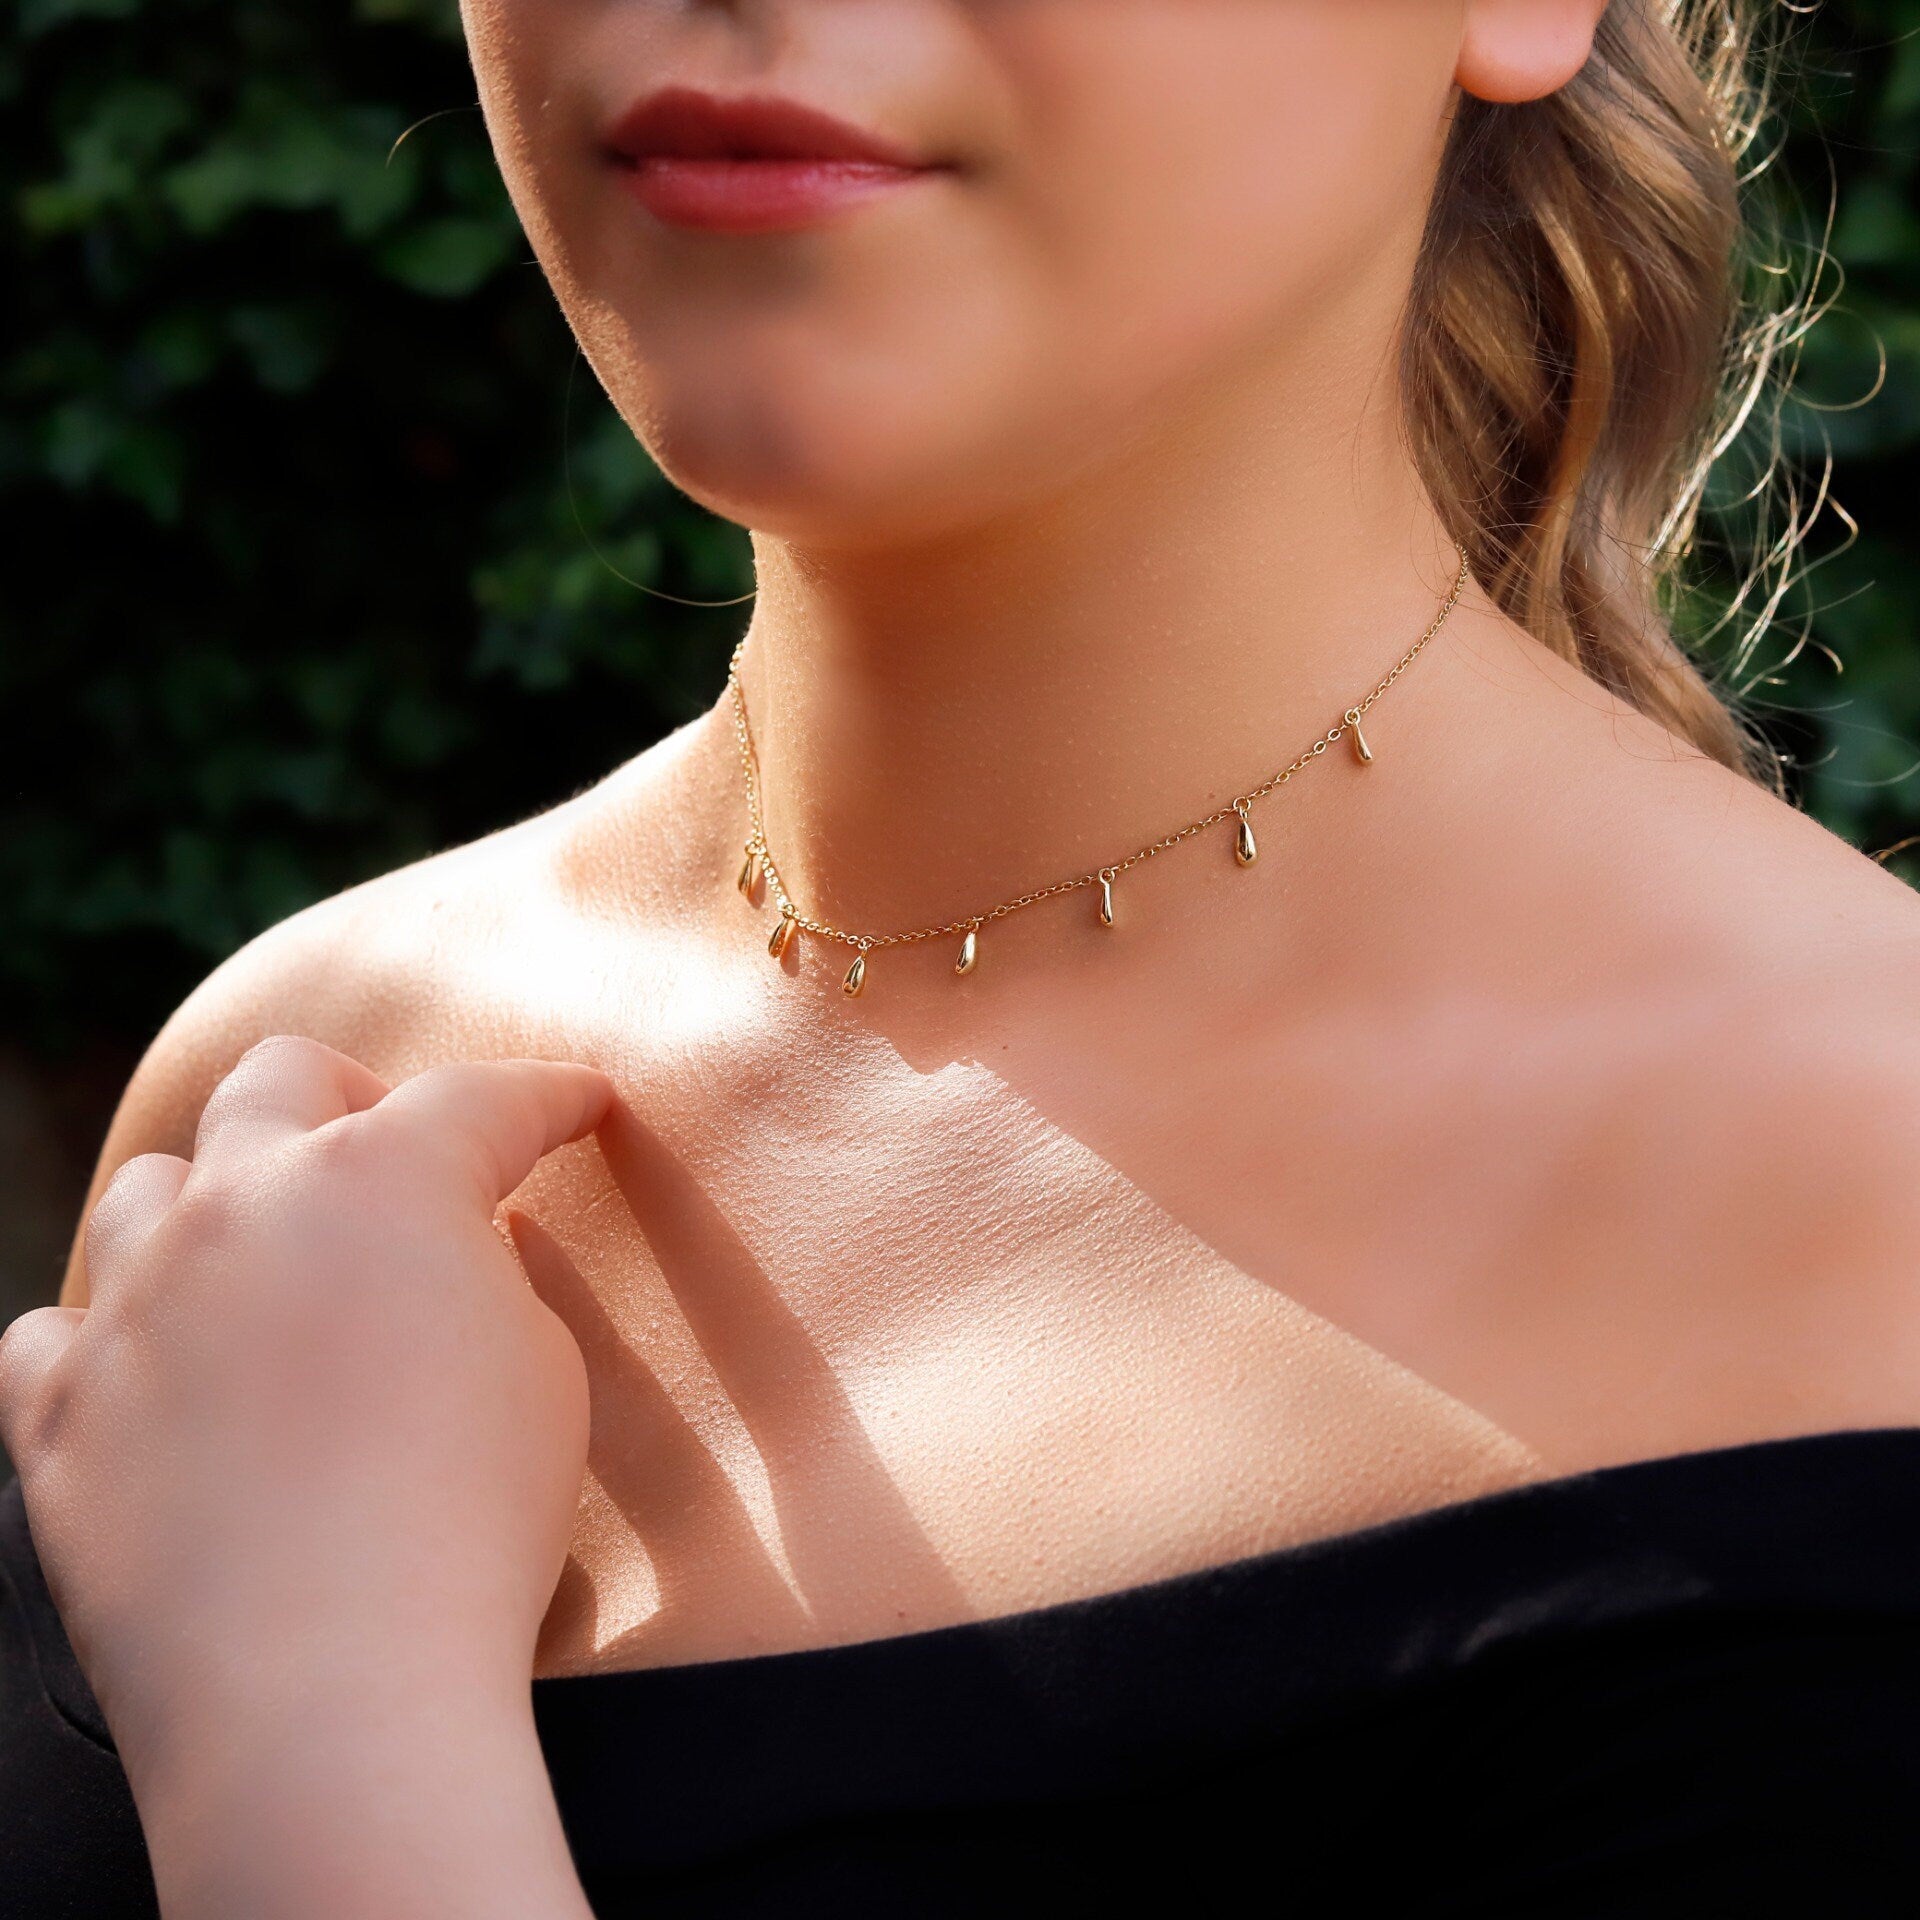 Miranda - Delicate Layered Necklaces •Link Chain • Choker Necklace, Satellite Necklace, Dainty Necklace, Layering Beaded Chain,